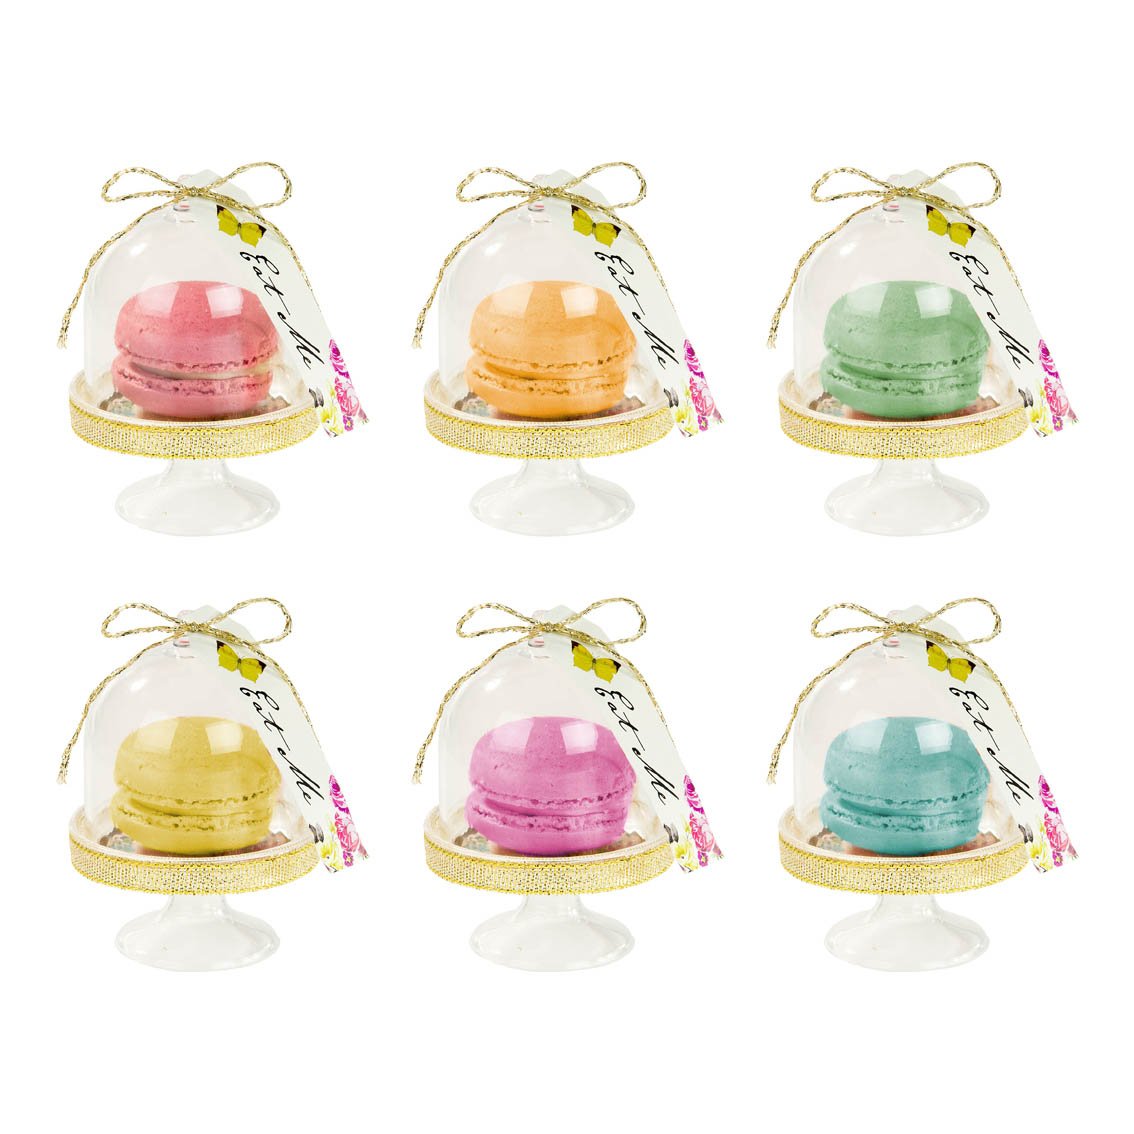 Truly Alice Curious Cake Domes